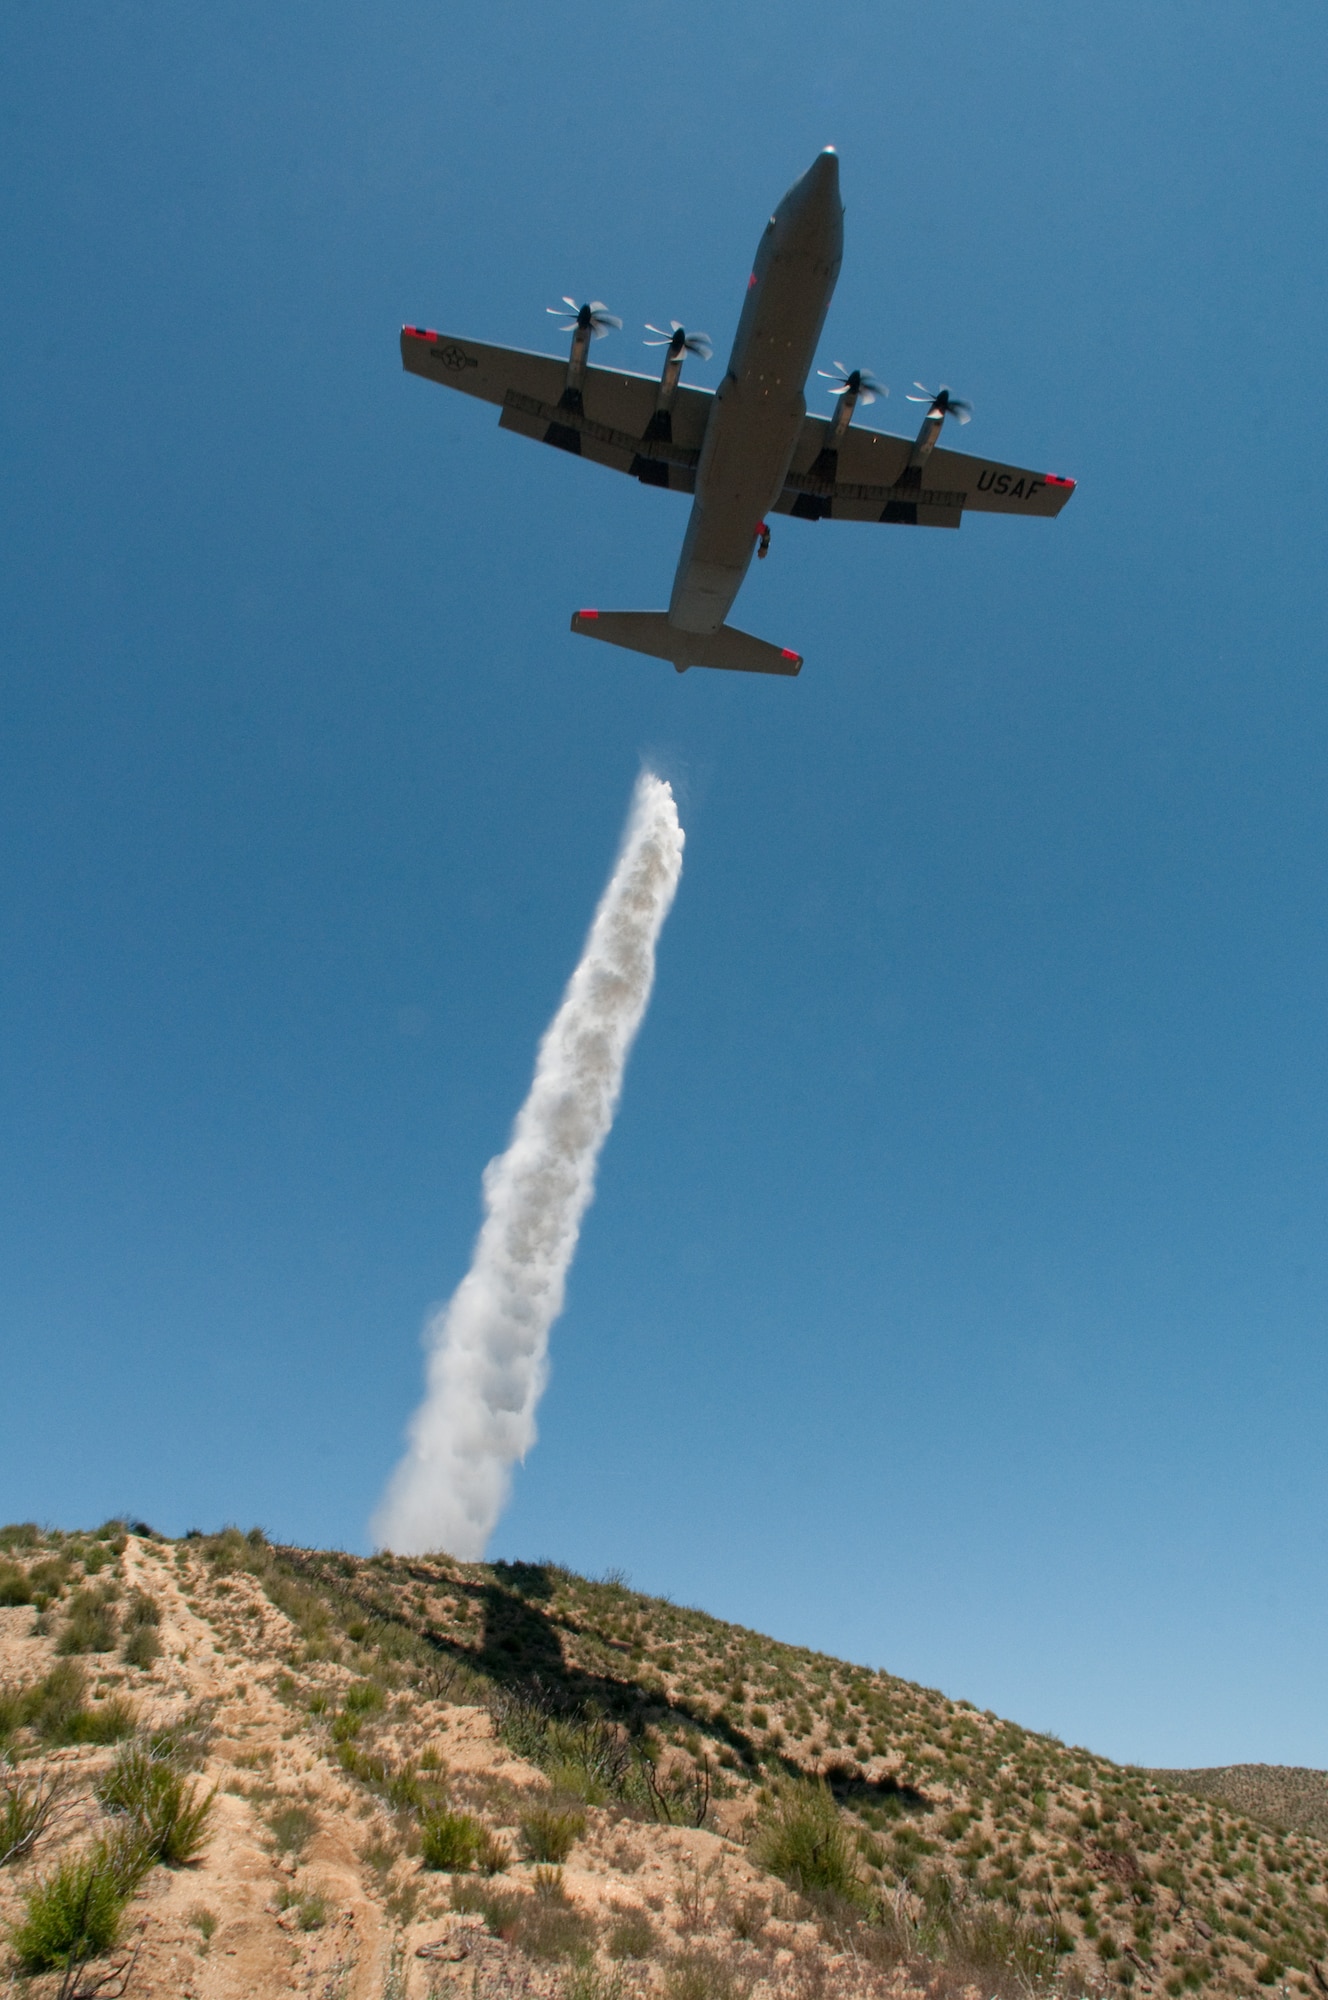 146th Airlift Wing MAFFS-equipped C-130J, California Air National Guard, drops water over the Angeles National Forest May 14, 2013. The 146th Airlift Wing held their annual Modular Airborne Firefighting Systems (MAFFS) recertification and training in partnership with U.S. Forest Service and CAL FIRE to prepare for the upcoming wildfire season. (U.S. Air National Guard photo by Staff Sgt. Nick Carzis)